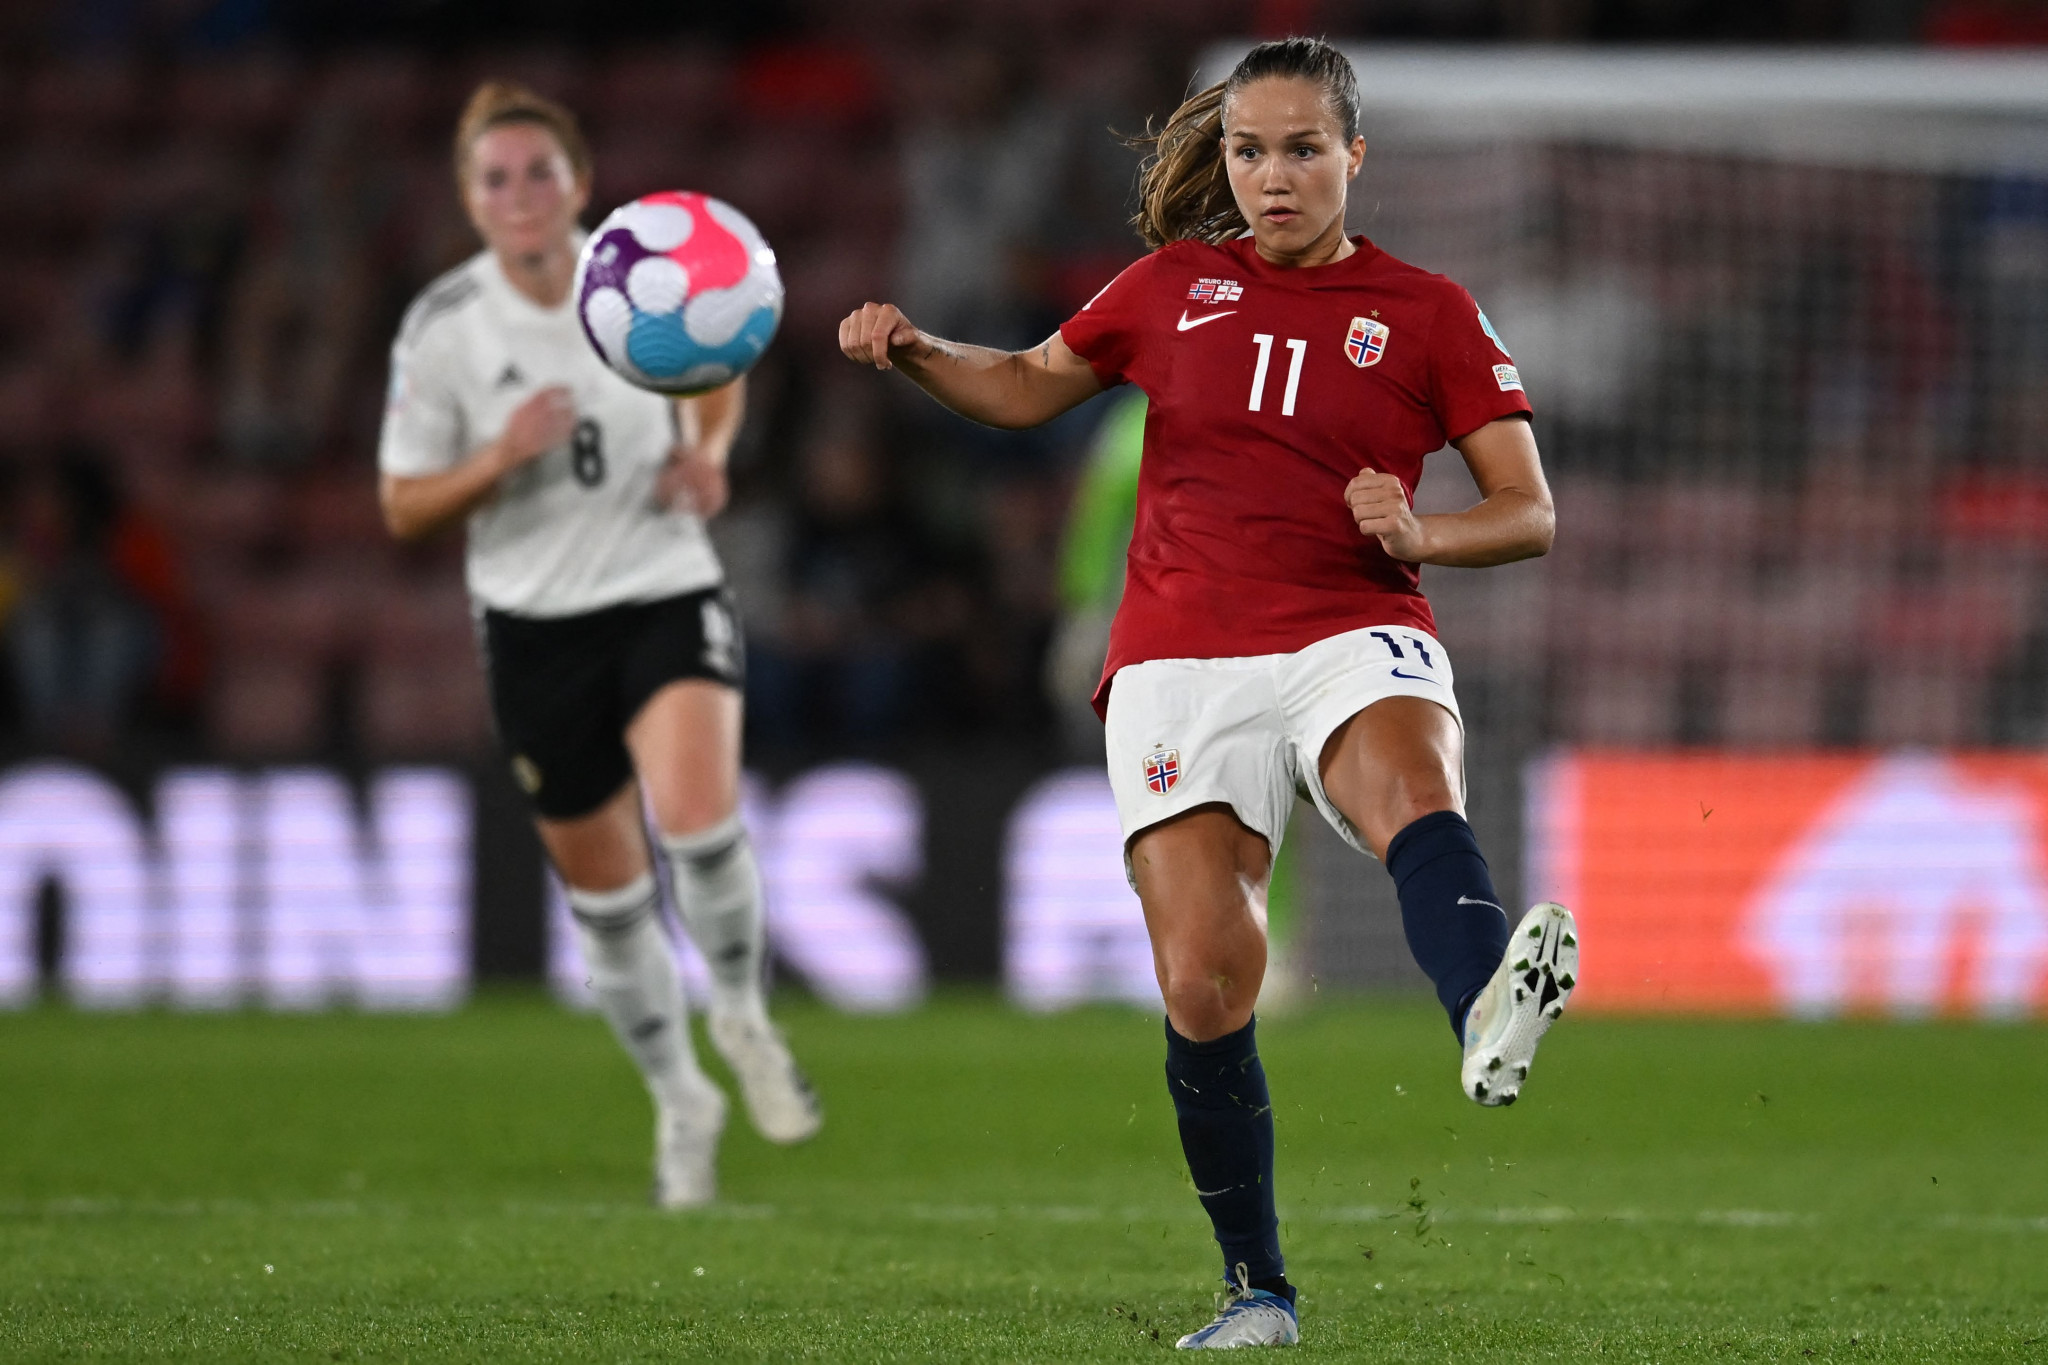 Norway impress with comfortable opening win at UEFA Women’s Euro 2022